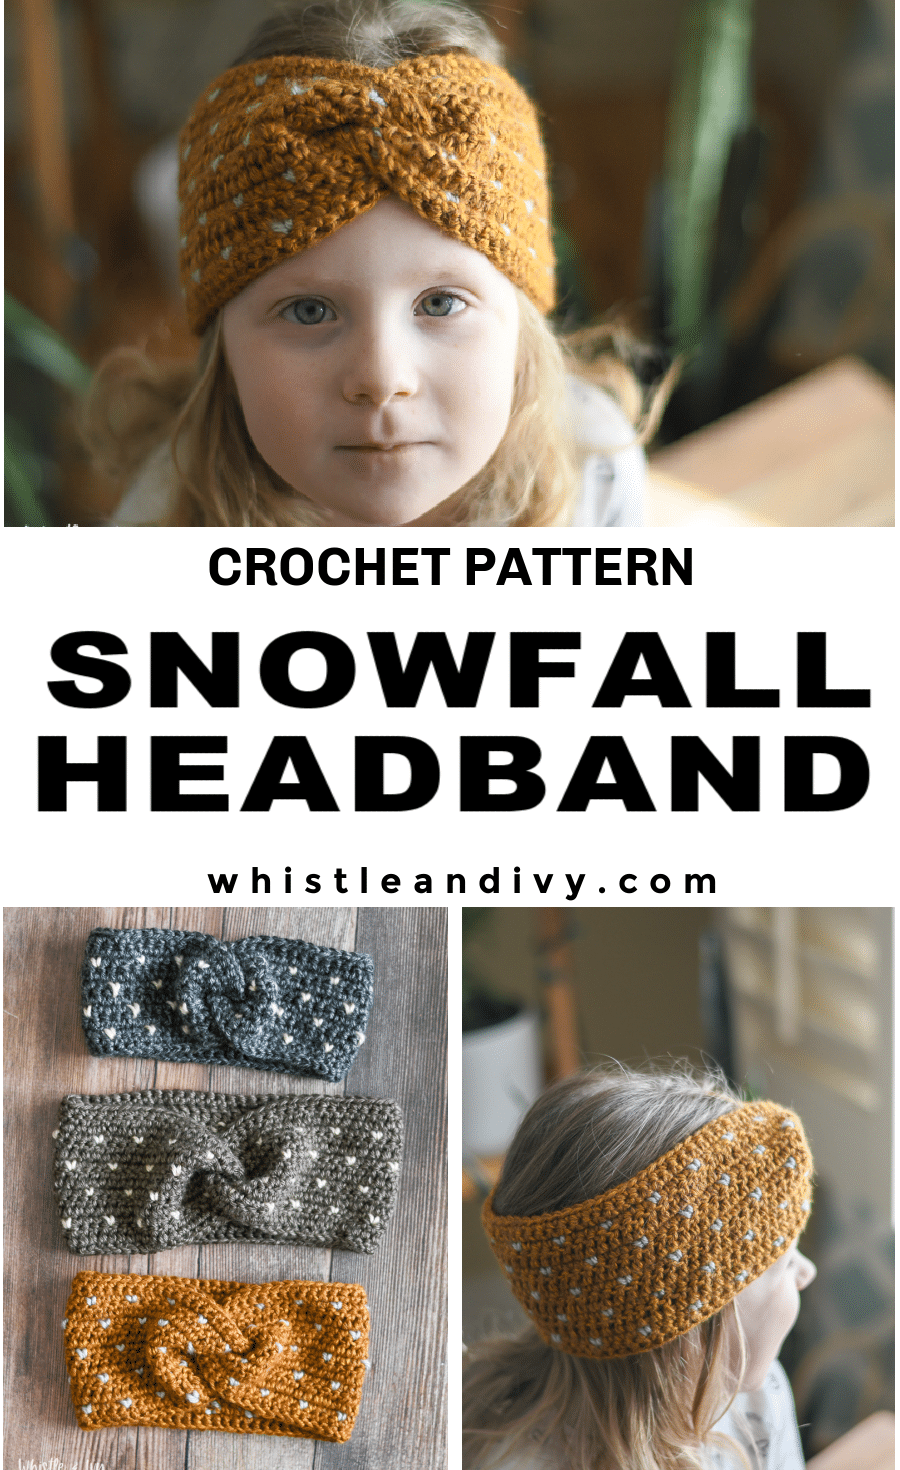 crochet pattern for crochet twist ear warmer headband  with knit look detail stitches and twist front seam